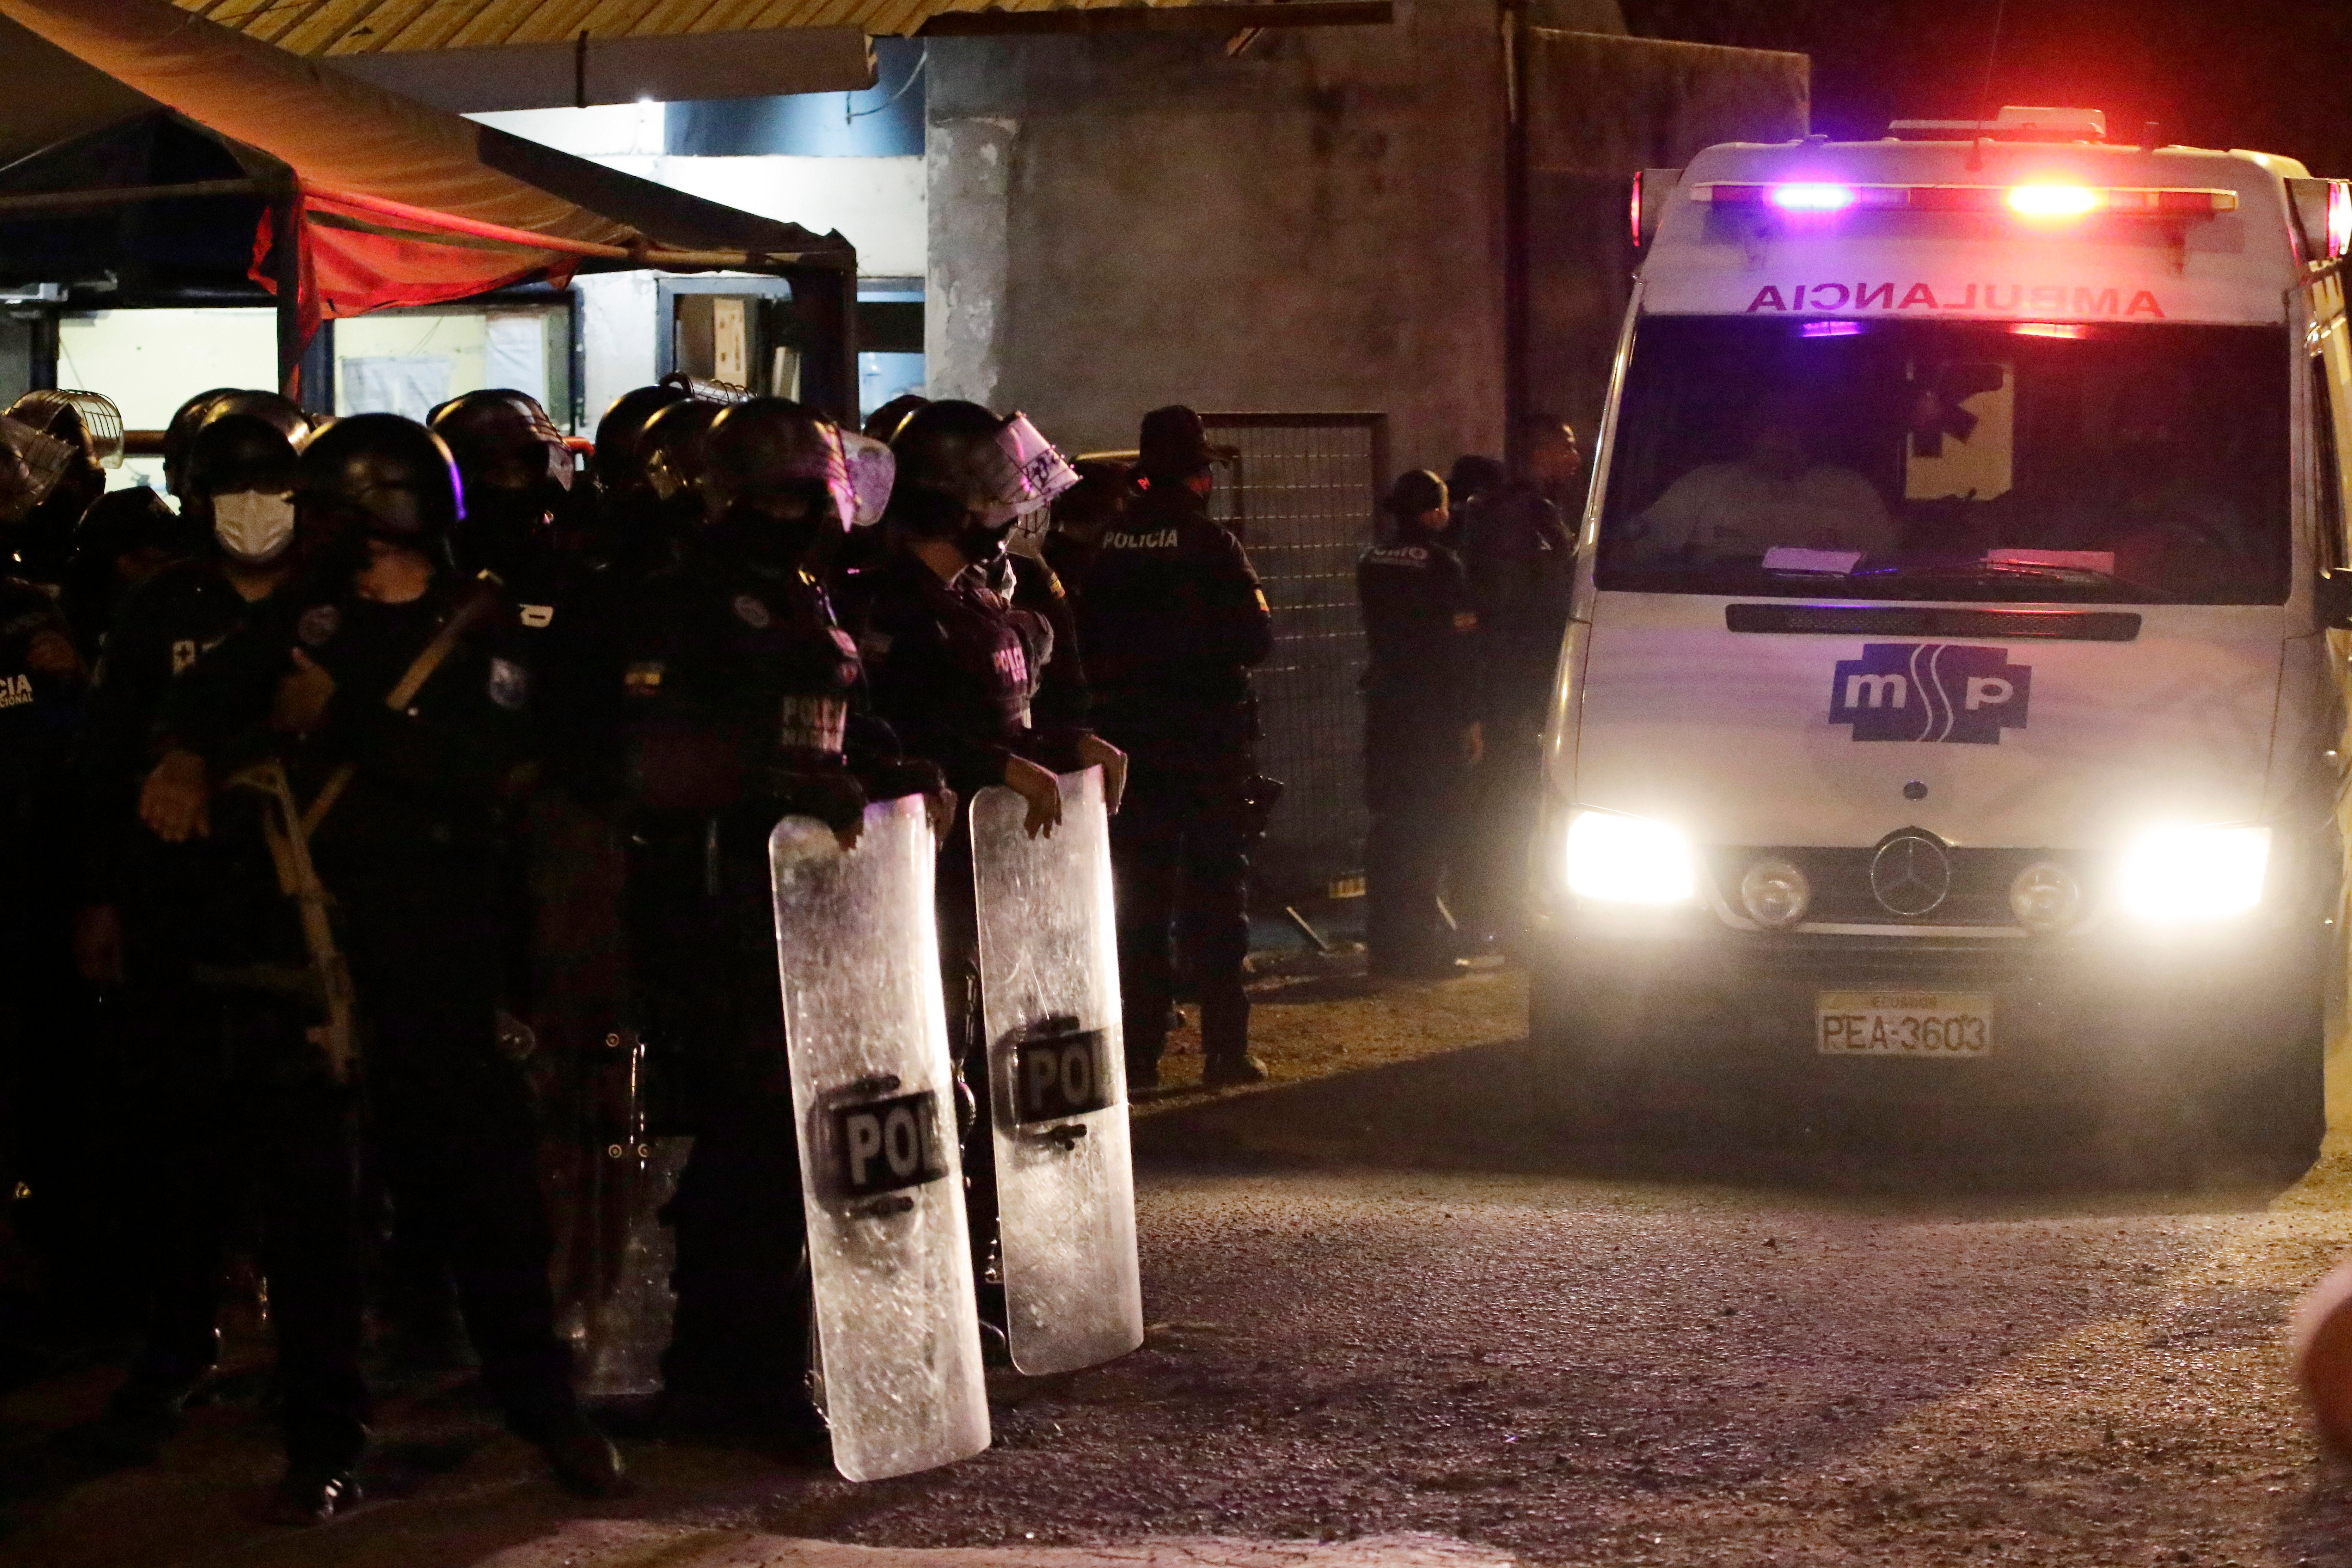 An ambulance leaves the Litoral Penitentiary in Guayaquil, Ecuador after a riot on Tuesday night